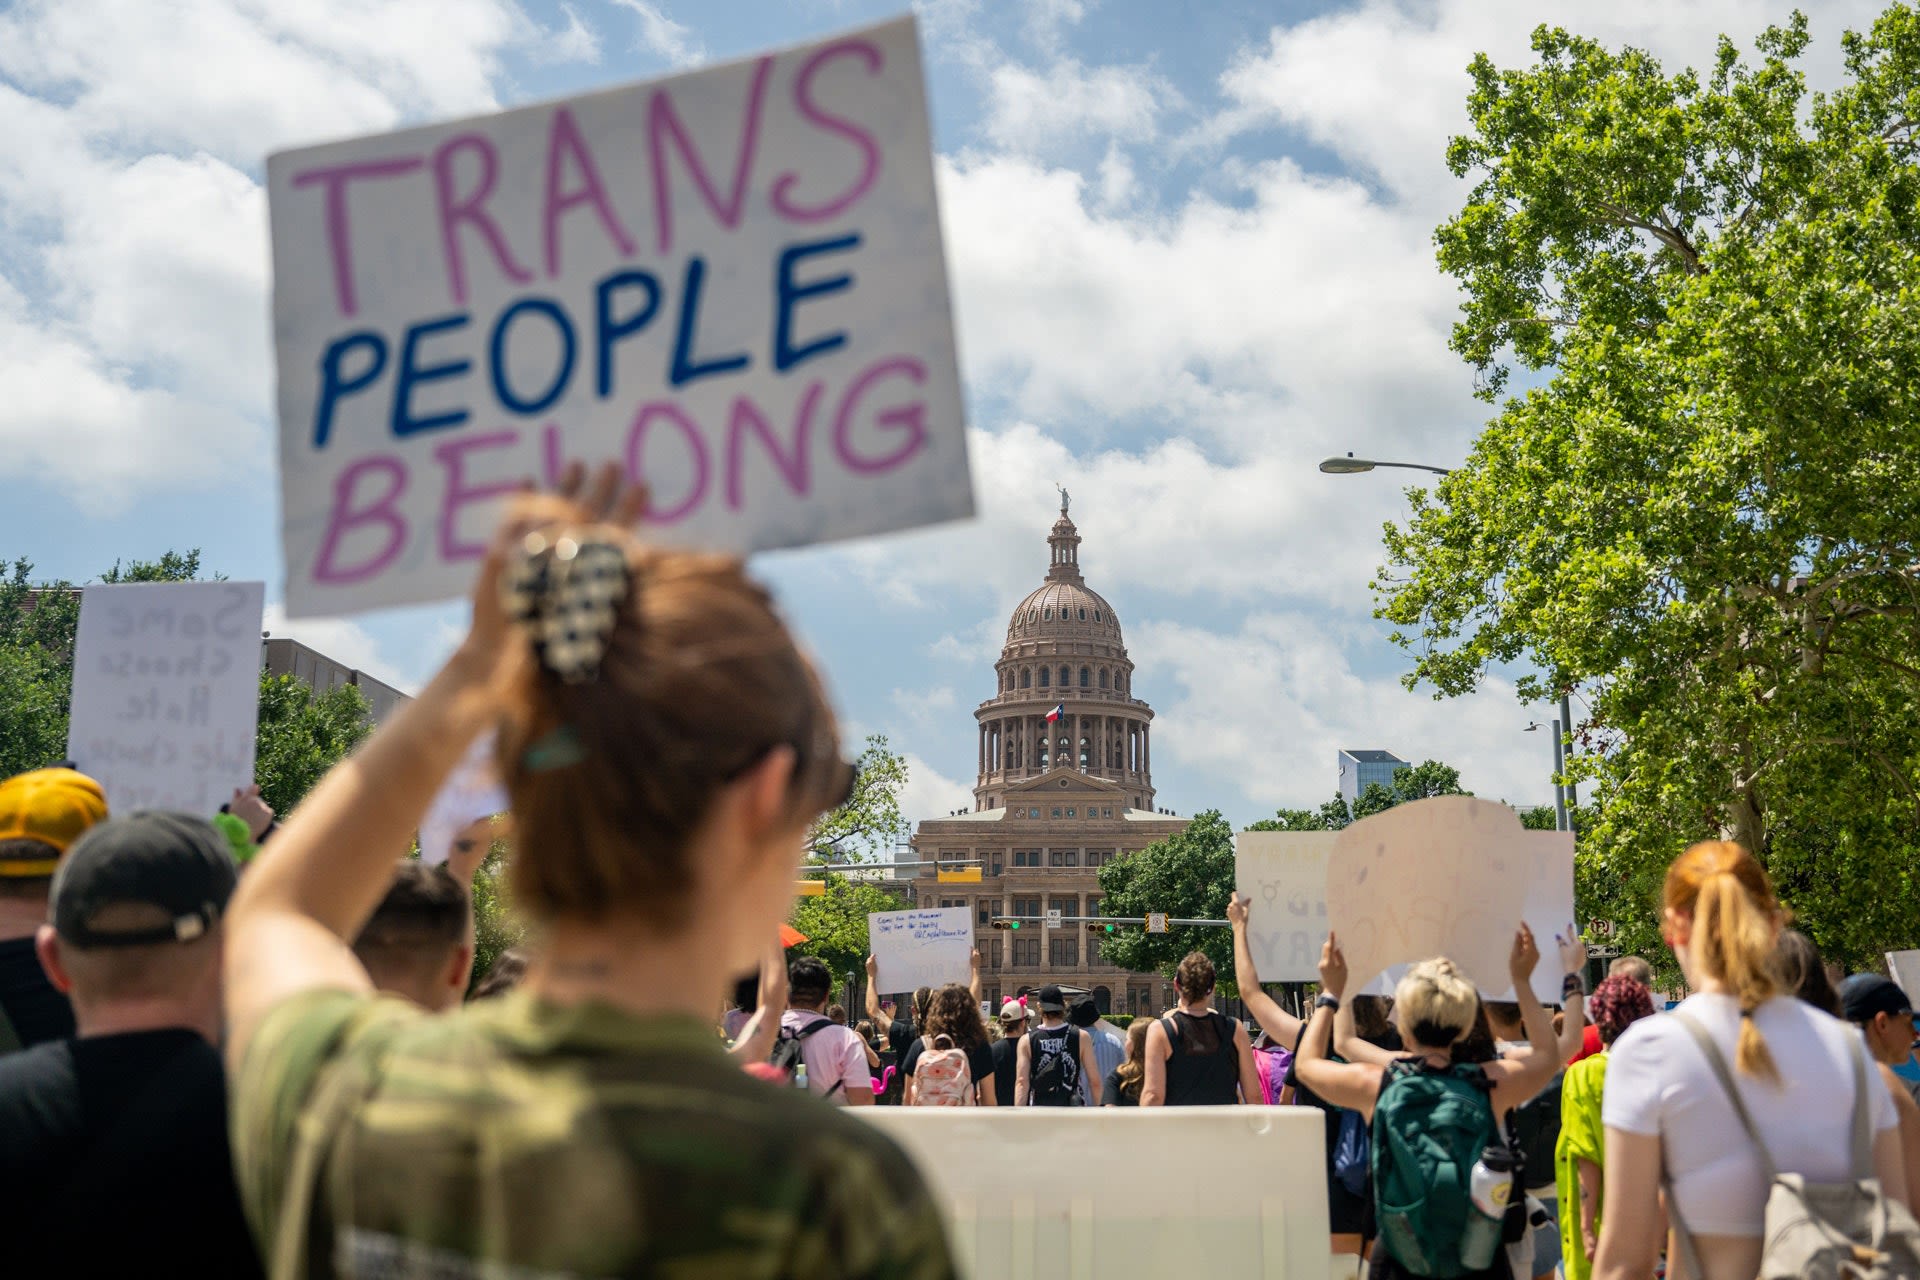 Texas' All-Republican Supreme Court Upholds Ban on Gender-Affirming Care for Youth